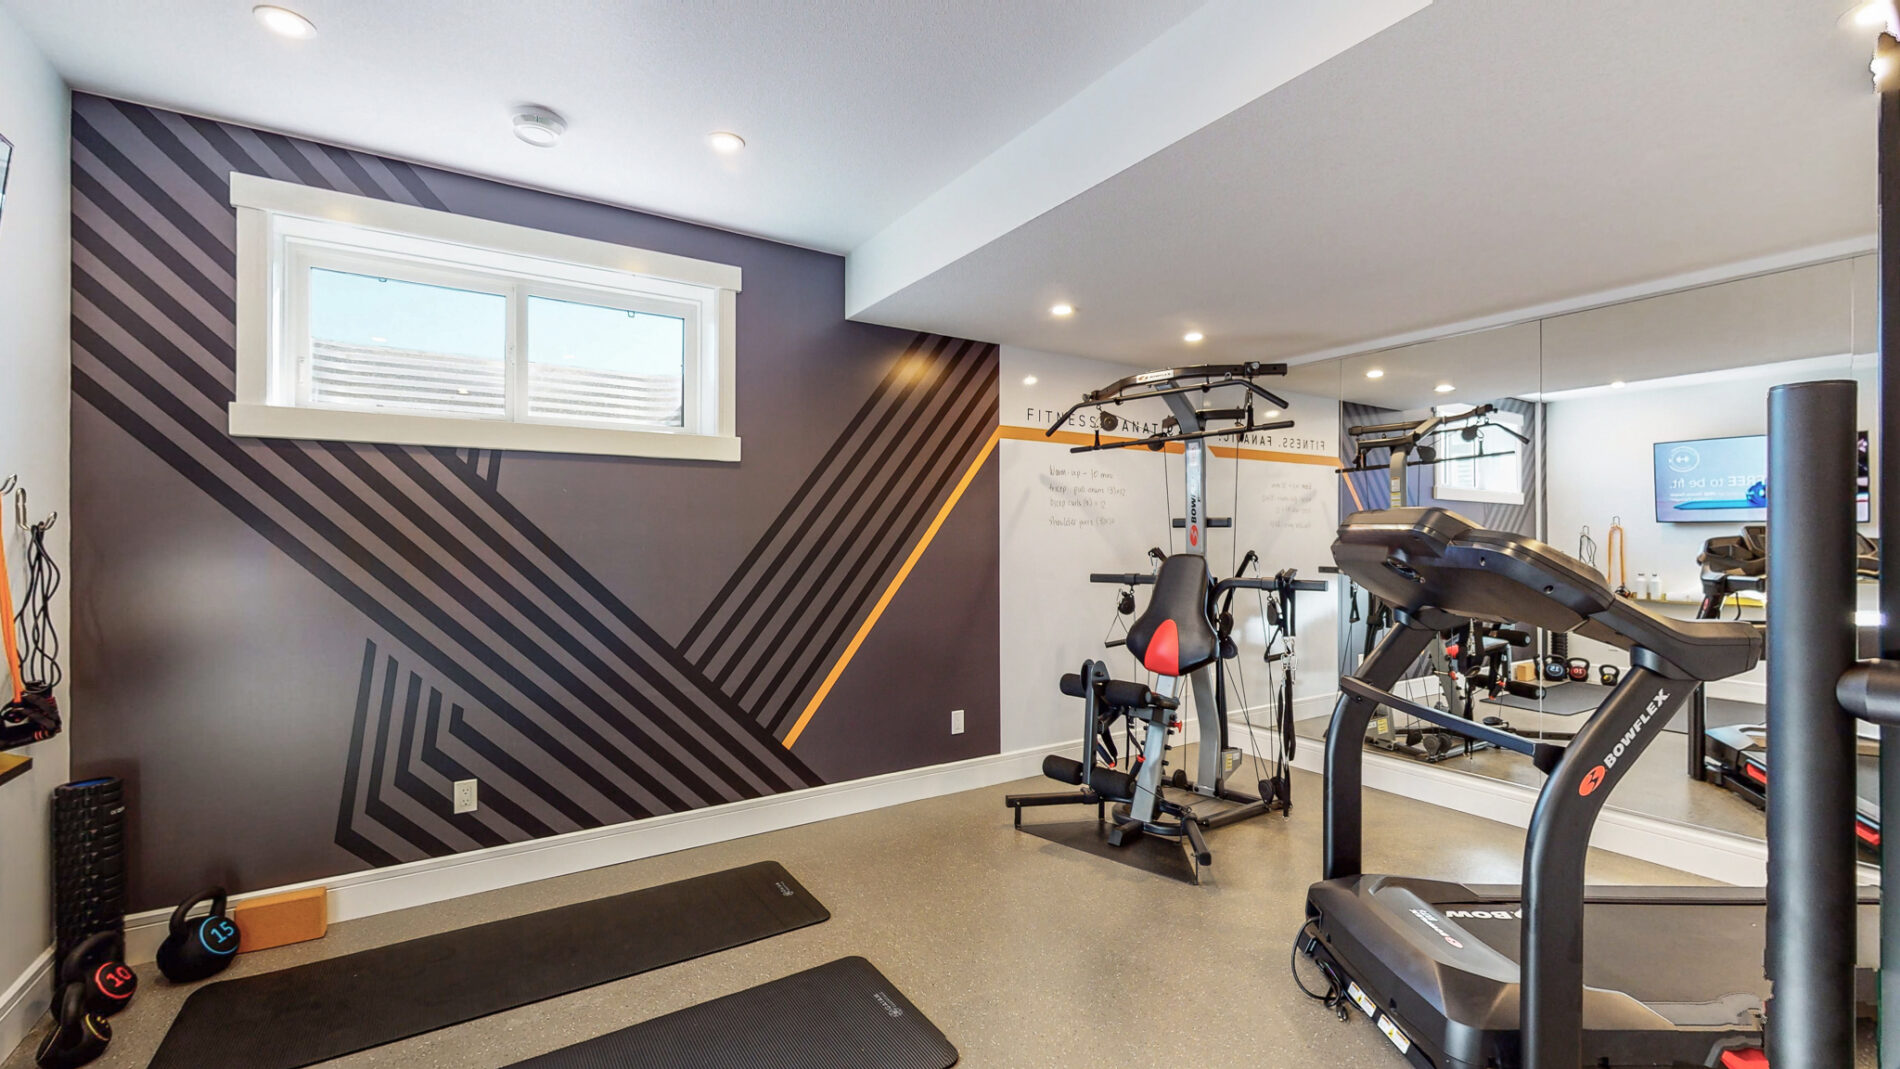 Home gym in Kail showhome with custom wall detail on wall including a white board, light rubber floor, floor to ceiling mirrors on one wall and gym equipment centered in room